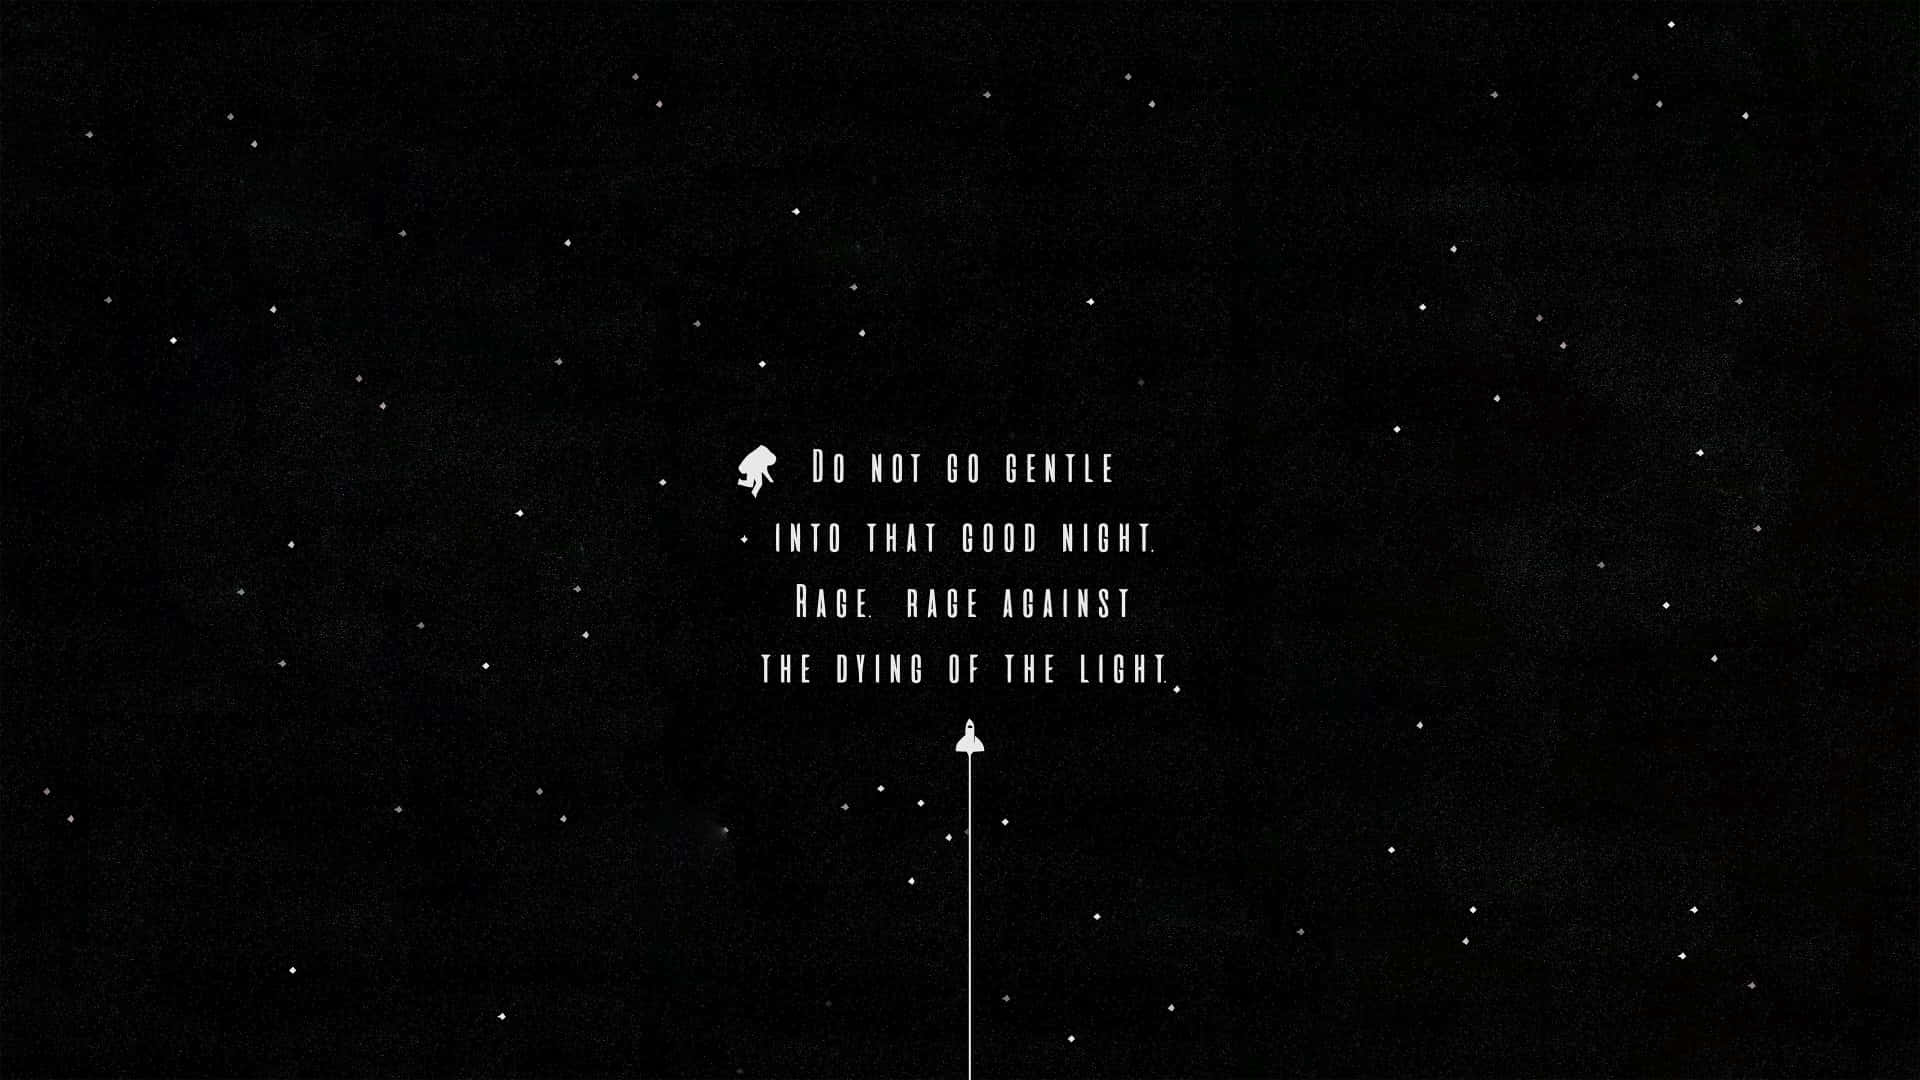 A Black And White Image Of A Star With A Quote Wallpaper